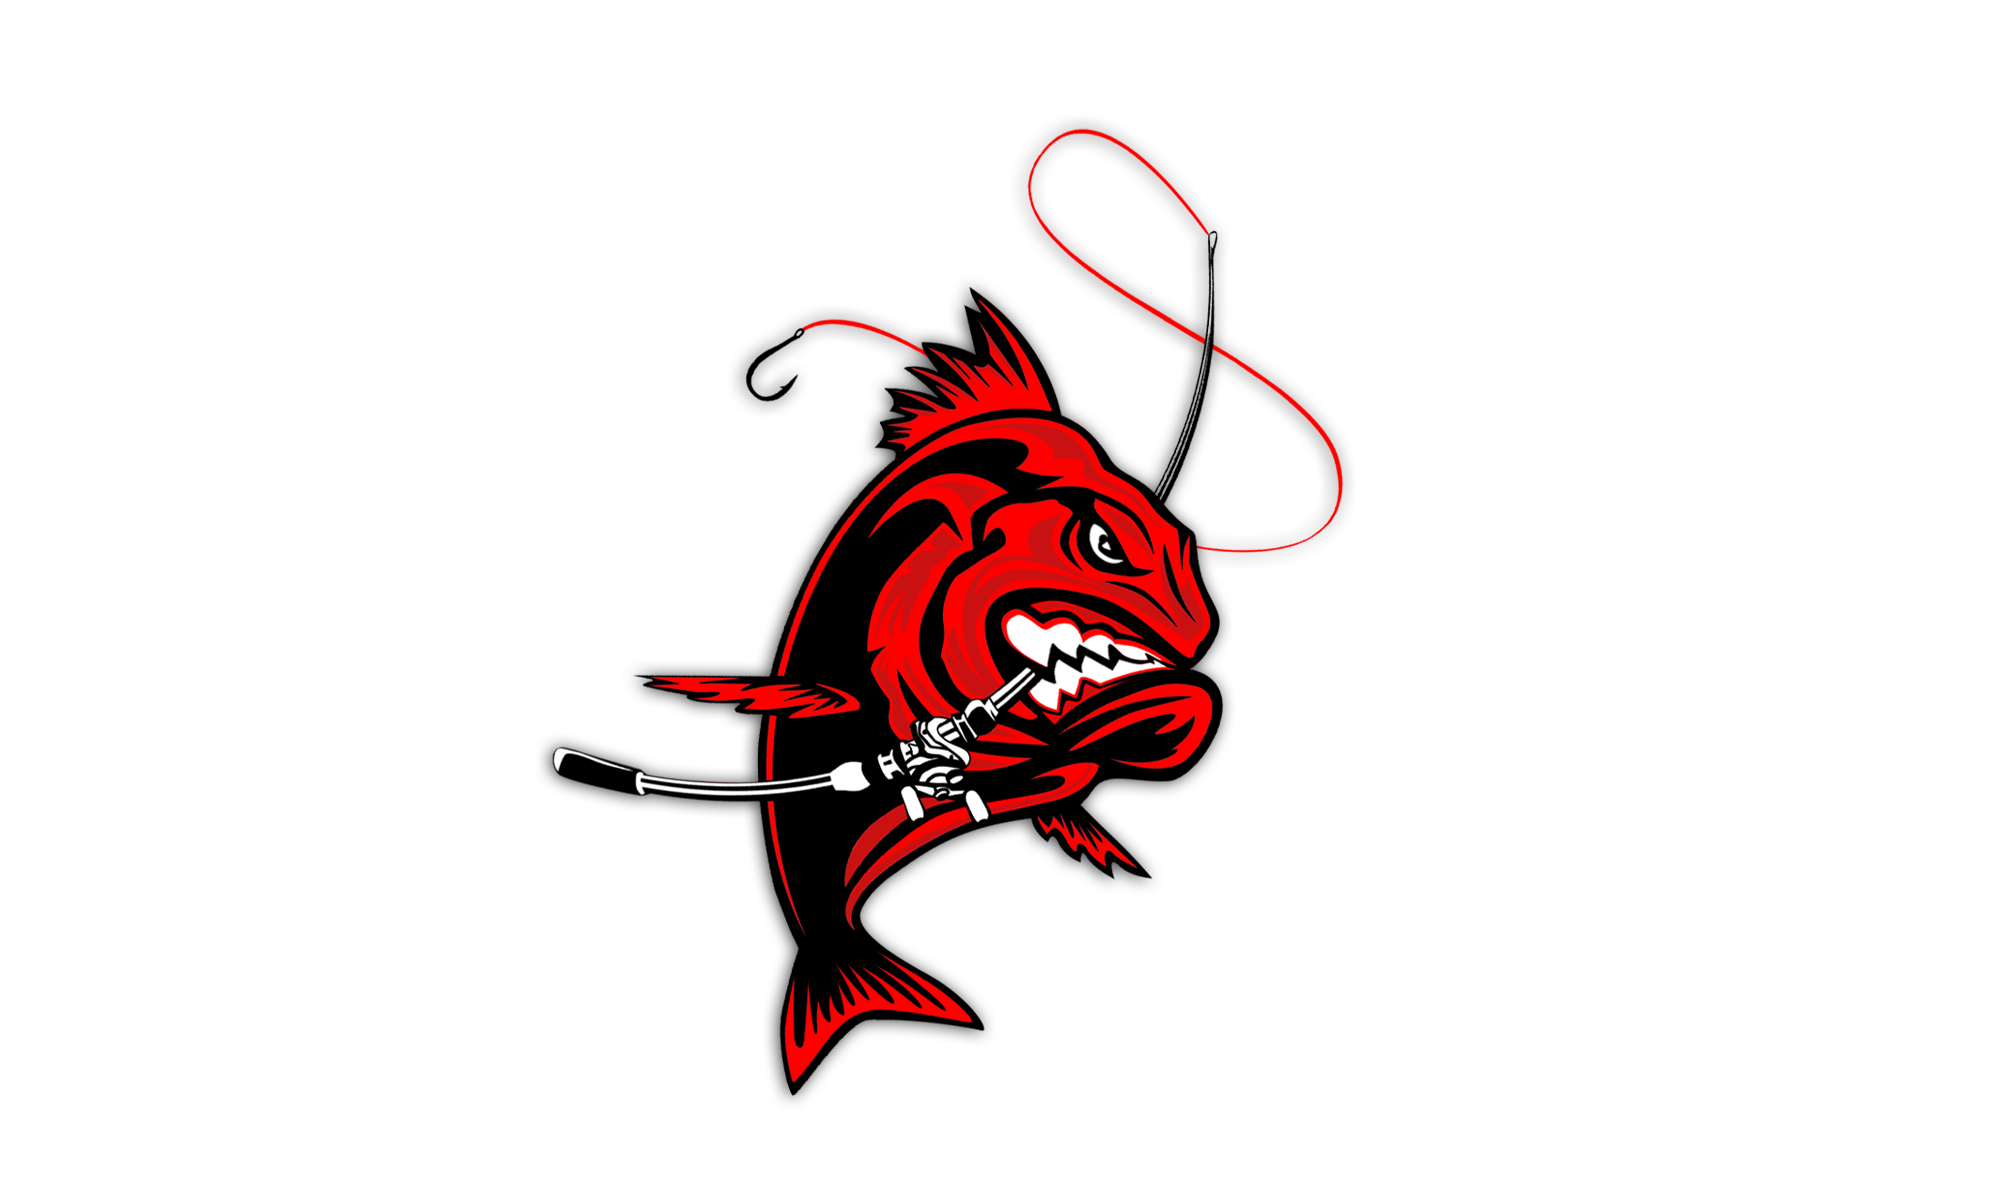 Diehard anglers is a social media platform for pro anglers, amatuer anglers, and all fishing enthusiasts